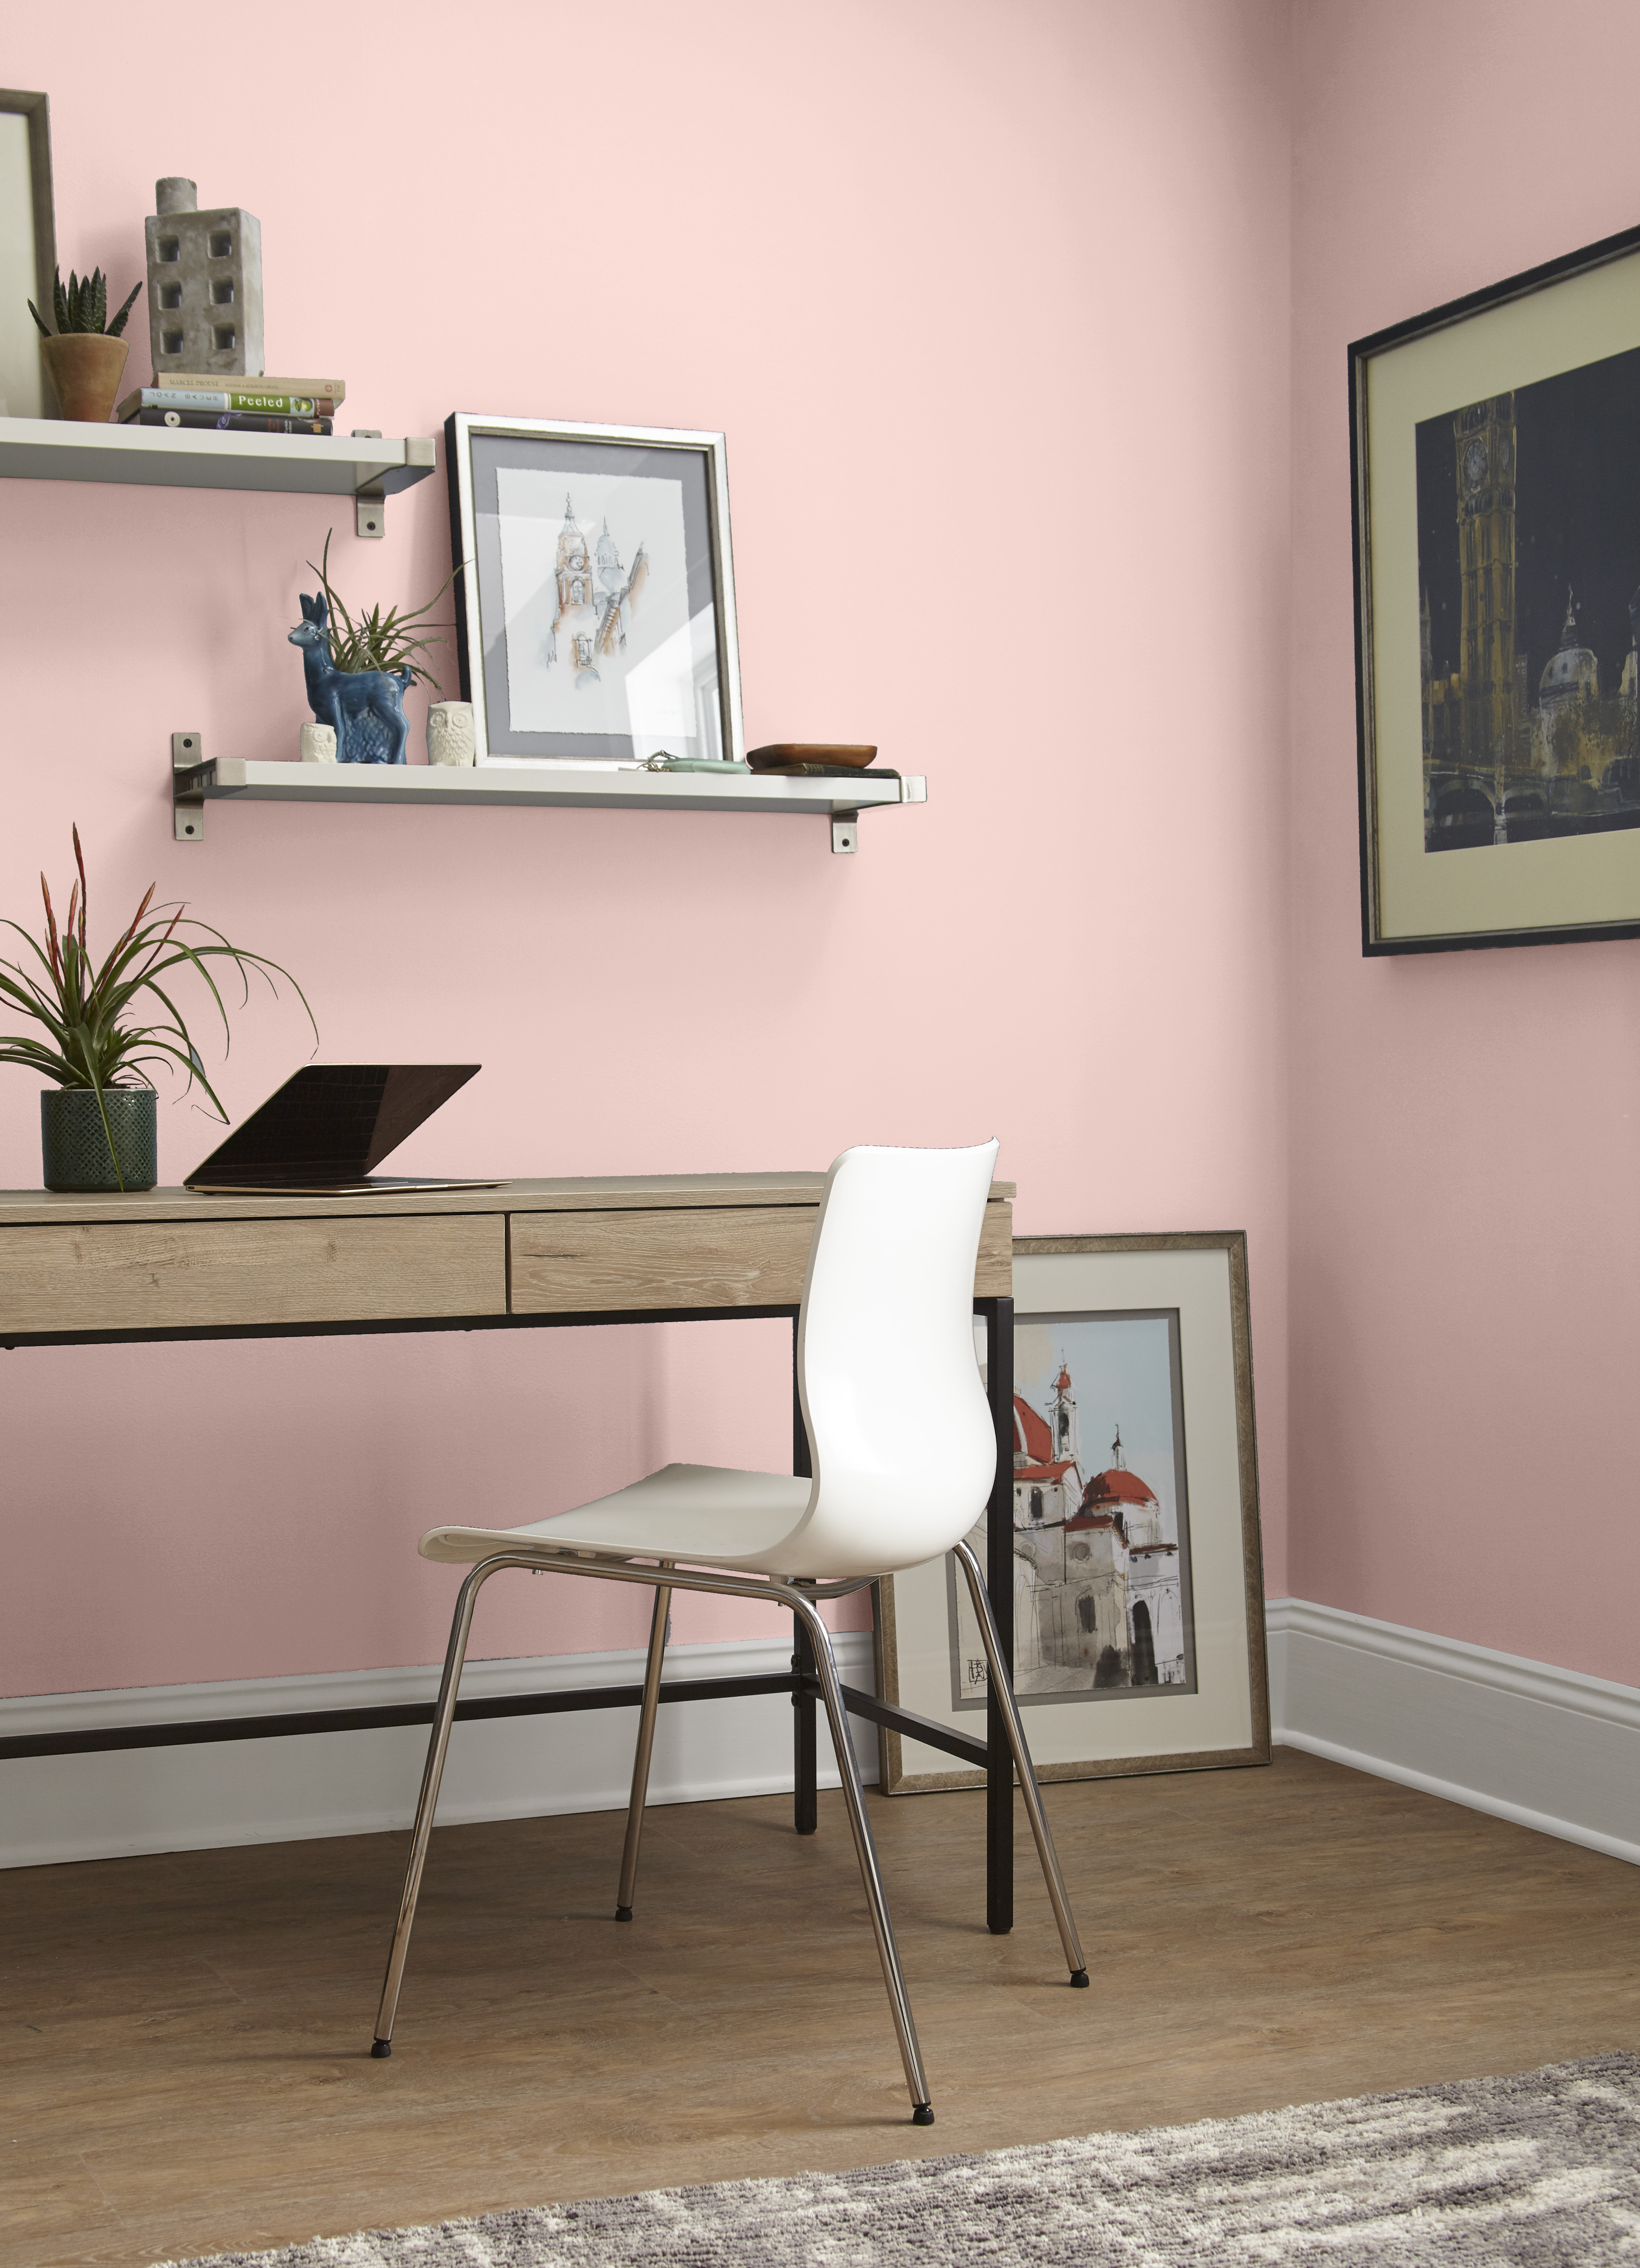 A home office area with walls painted in a light pink colour